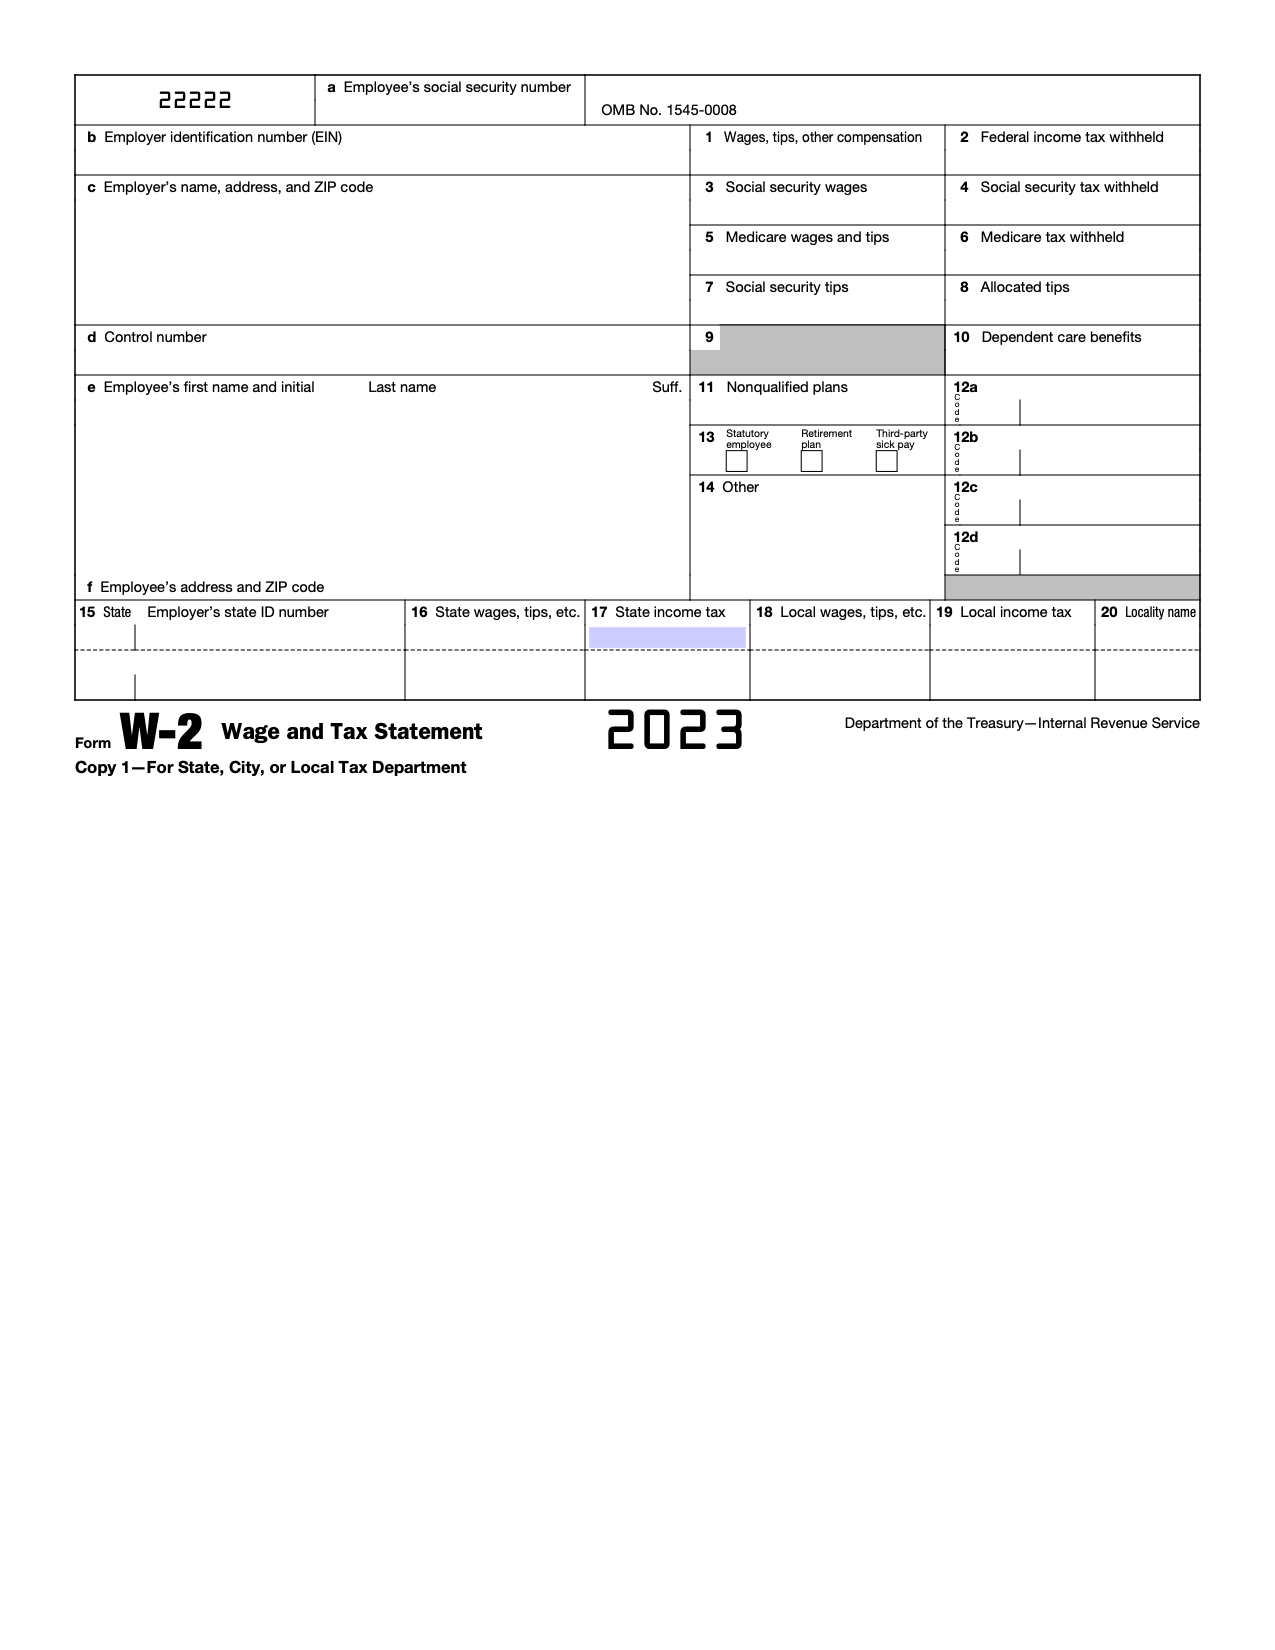 Free Irs Form W-2 | Wage And Tax Statement - Pdf – Eforms throughout Fillable W2 Form 2023